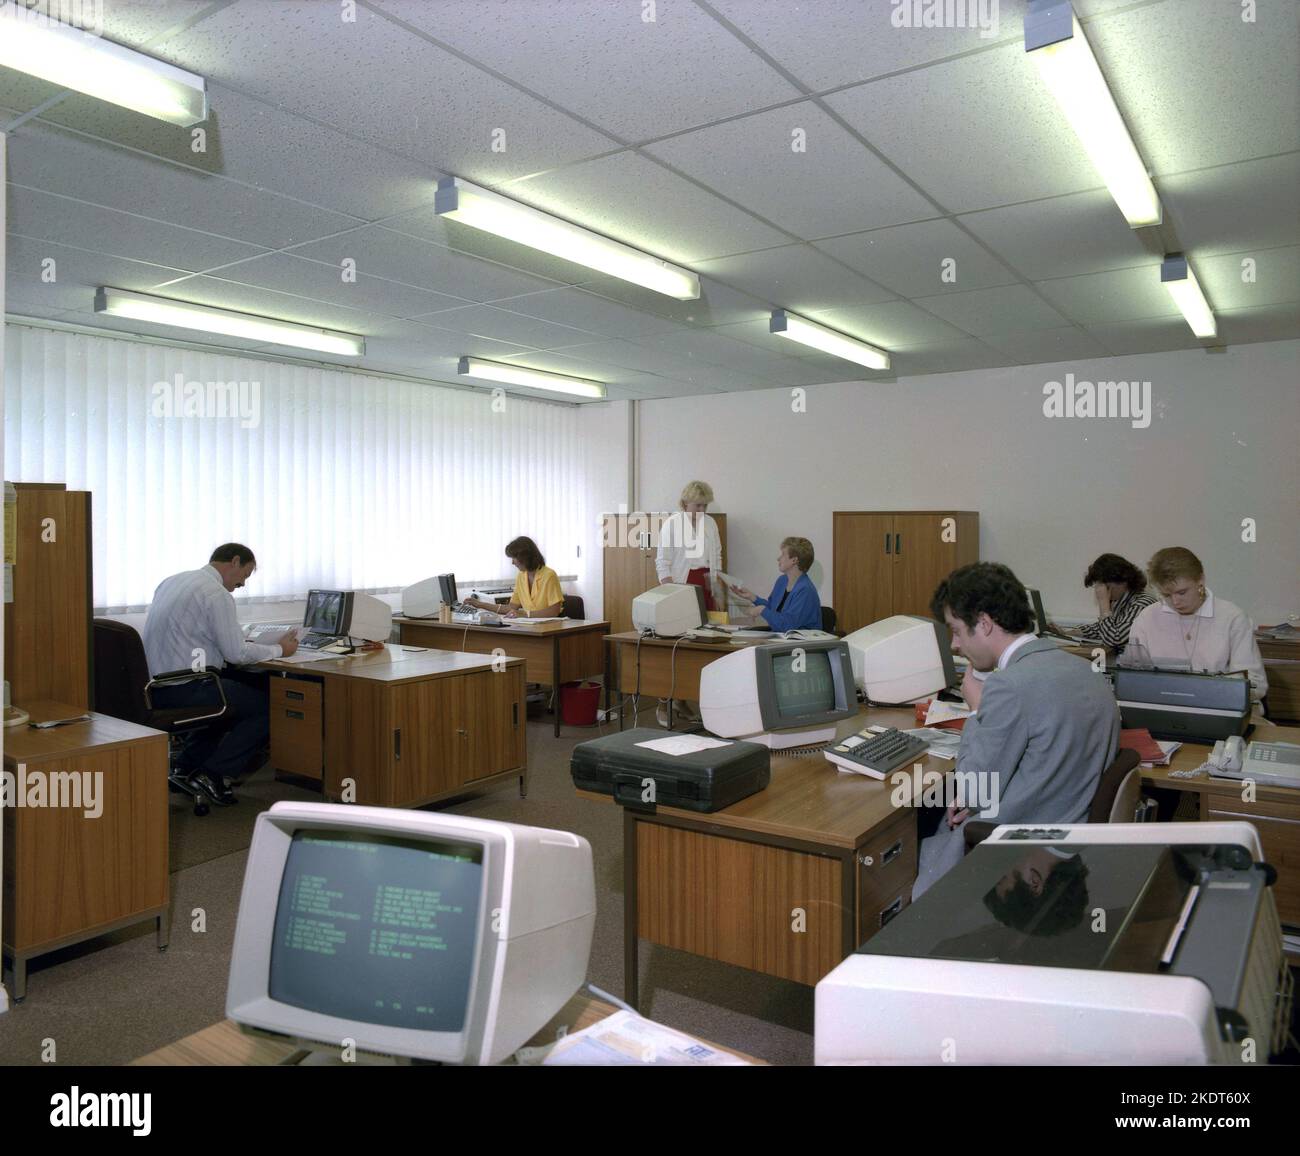 1980s, historical, view across an open office of the era, male and female employees working at desks, using small desk-top computer terminals, most likely made by IBM, England, UK. Being CRT monitors they displayed text in green, as seen in the picture and so became known as green screen terminals. Stock Photo